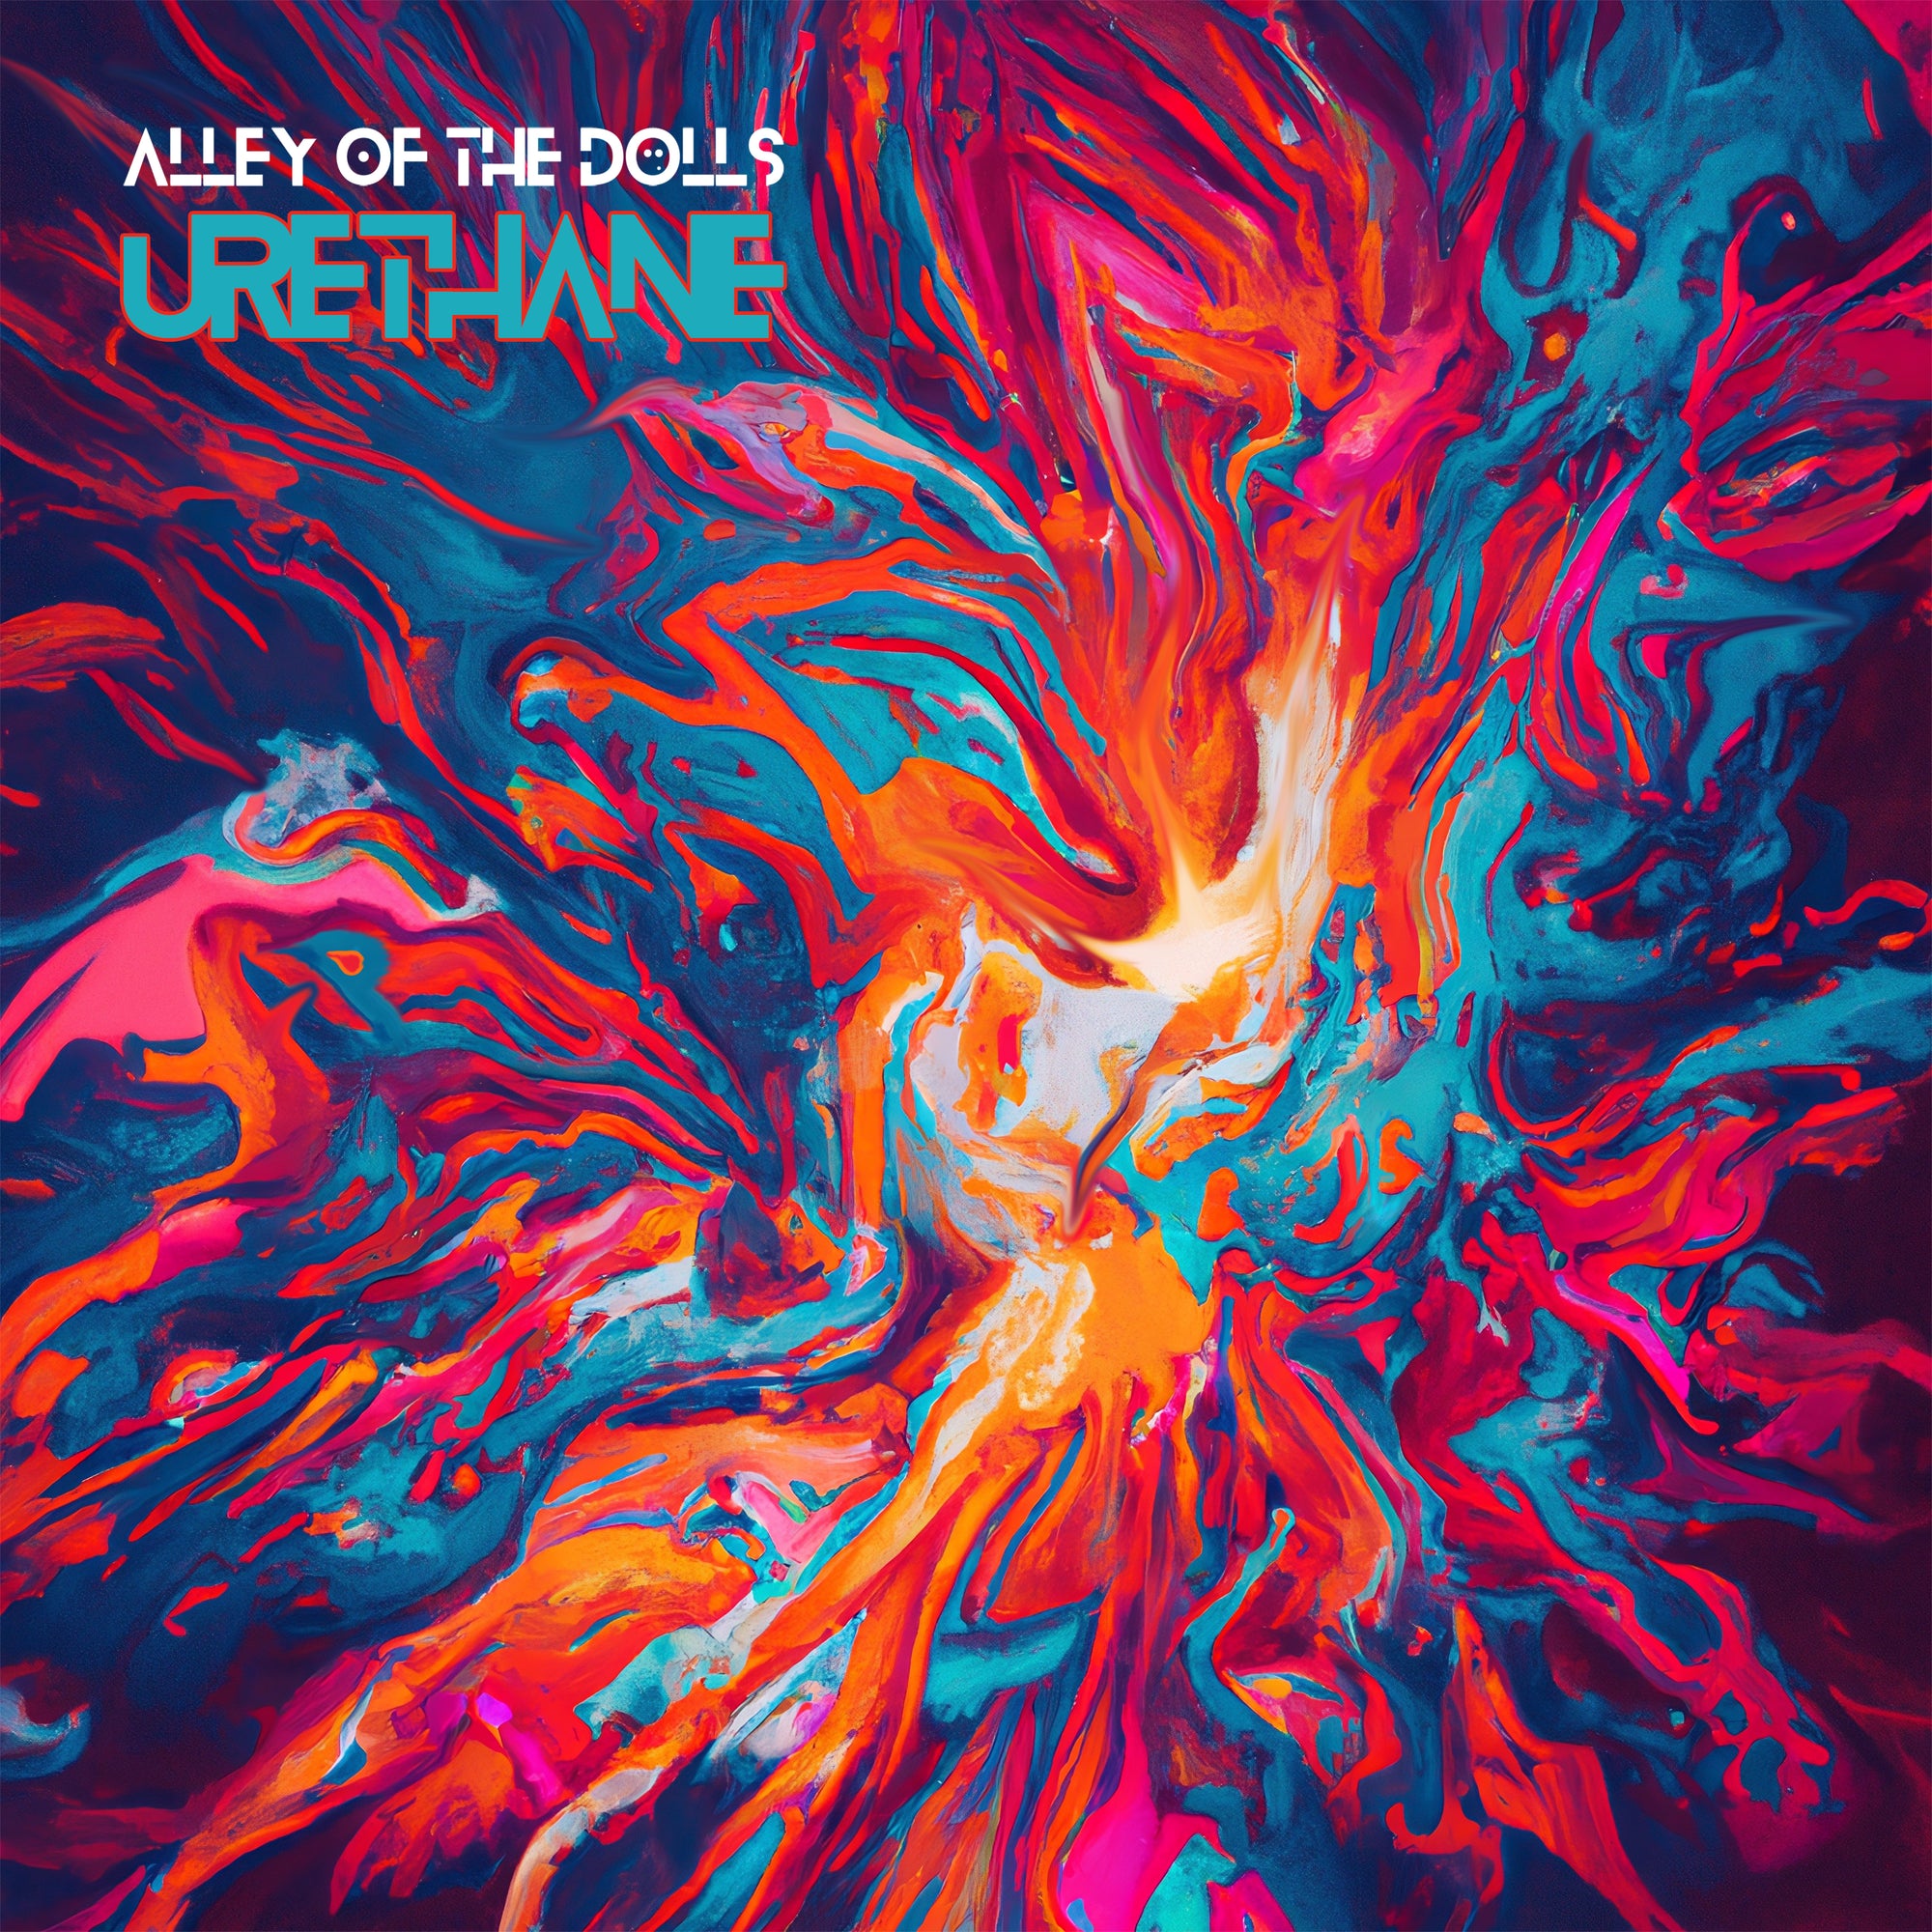 Alley of the Dolls create a sonic throwback with modern bite on debut EP 'Urethane'